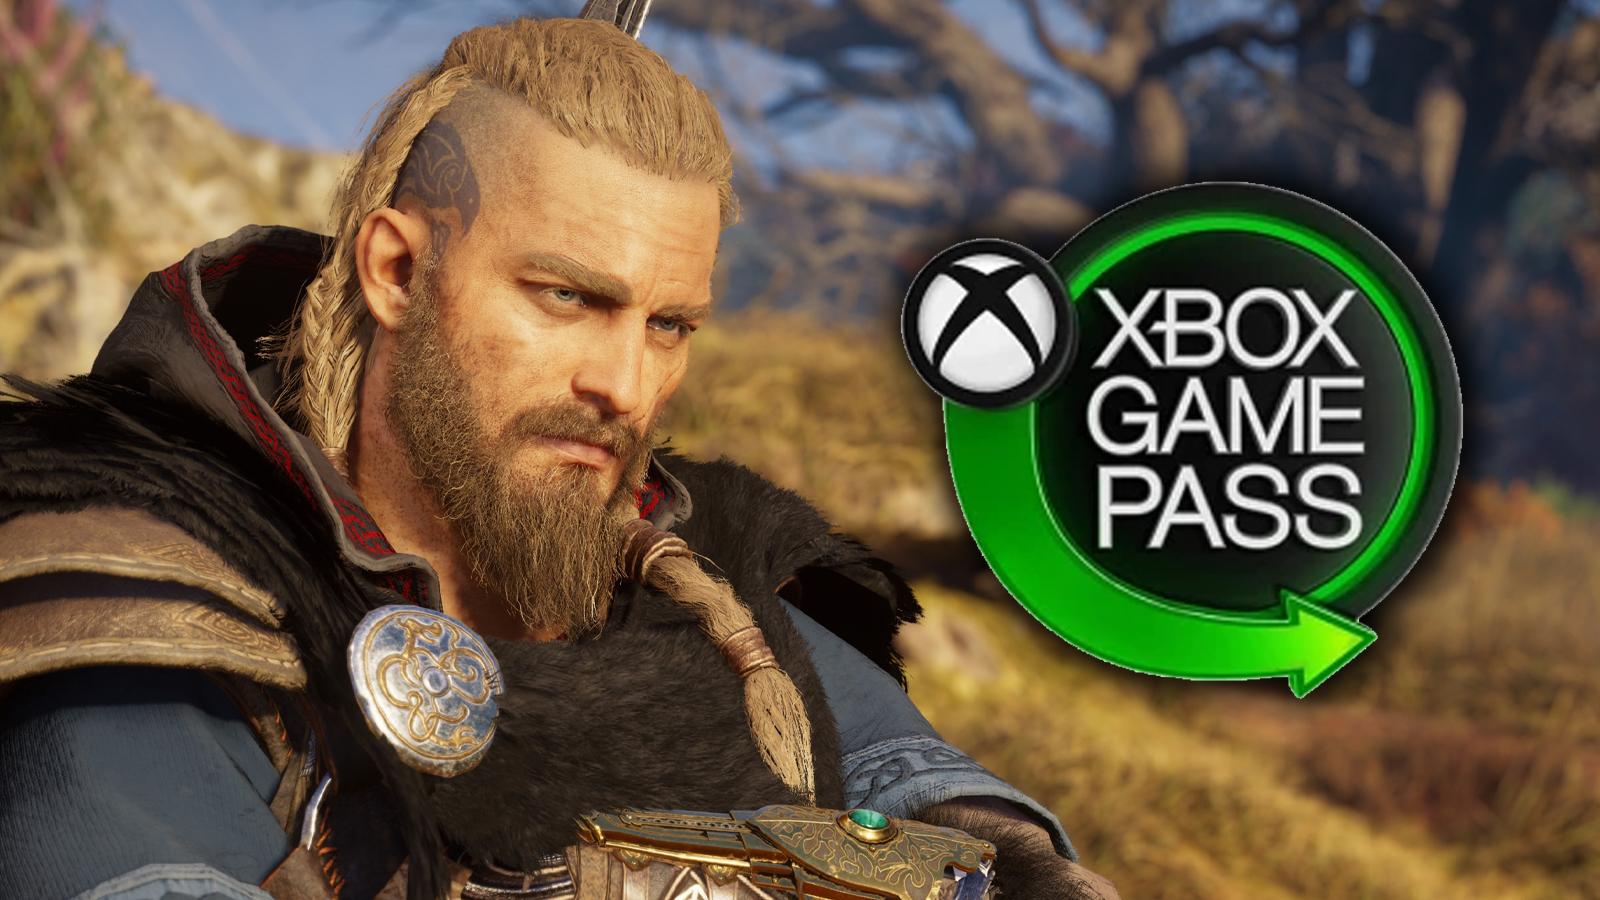 Is Assassin's Creed Valhalla on Xbox Game Pass? - Dexerto